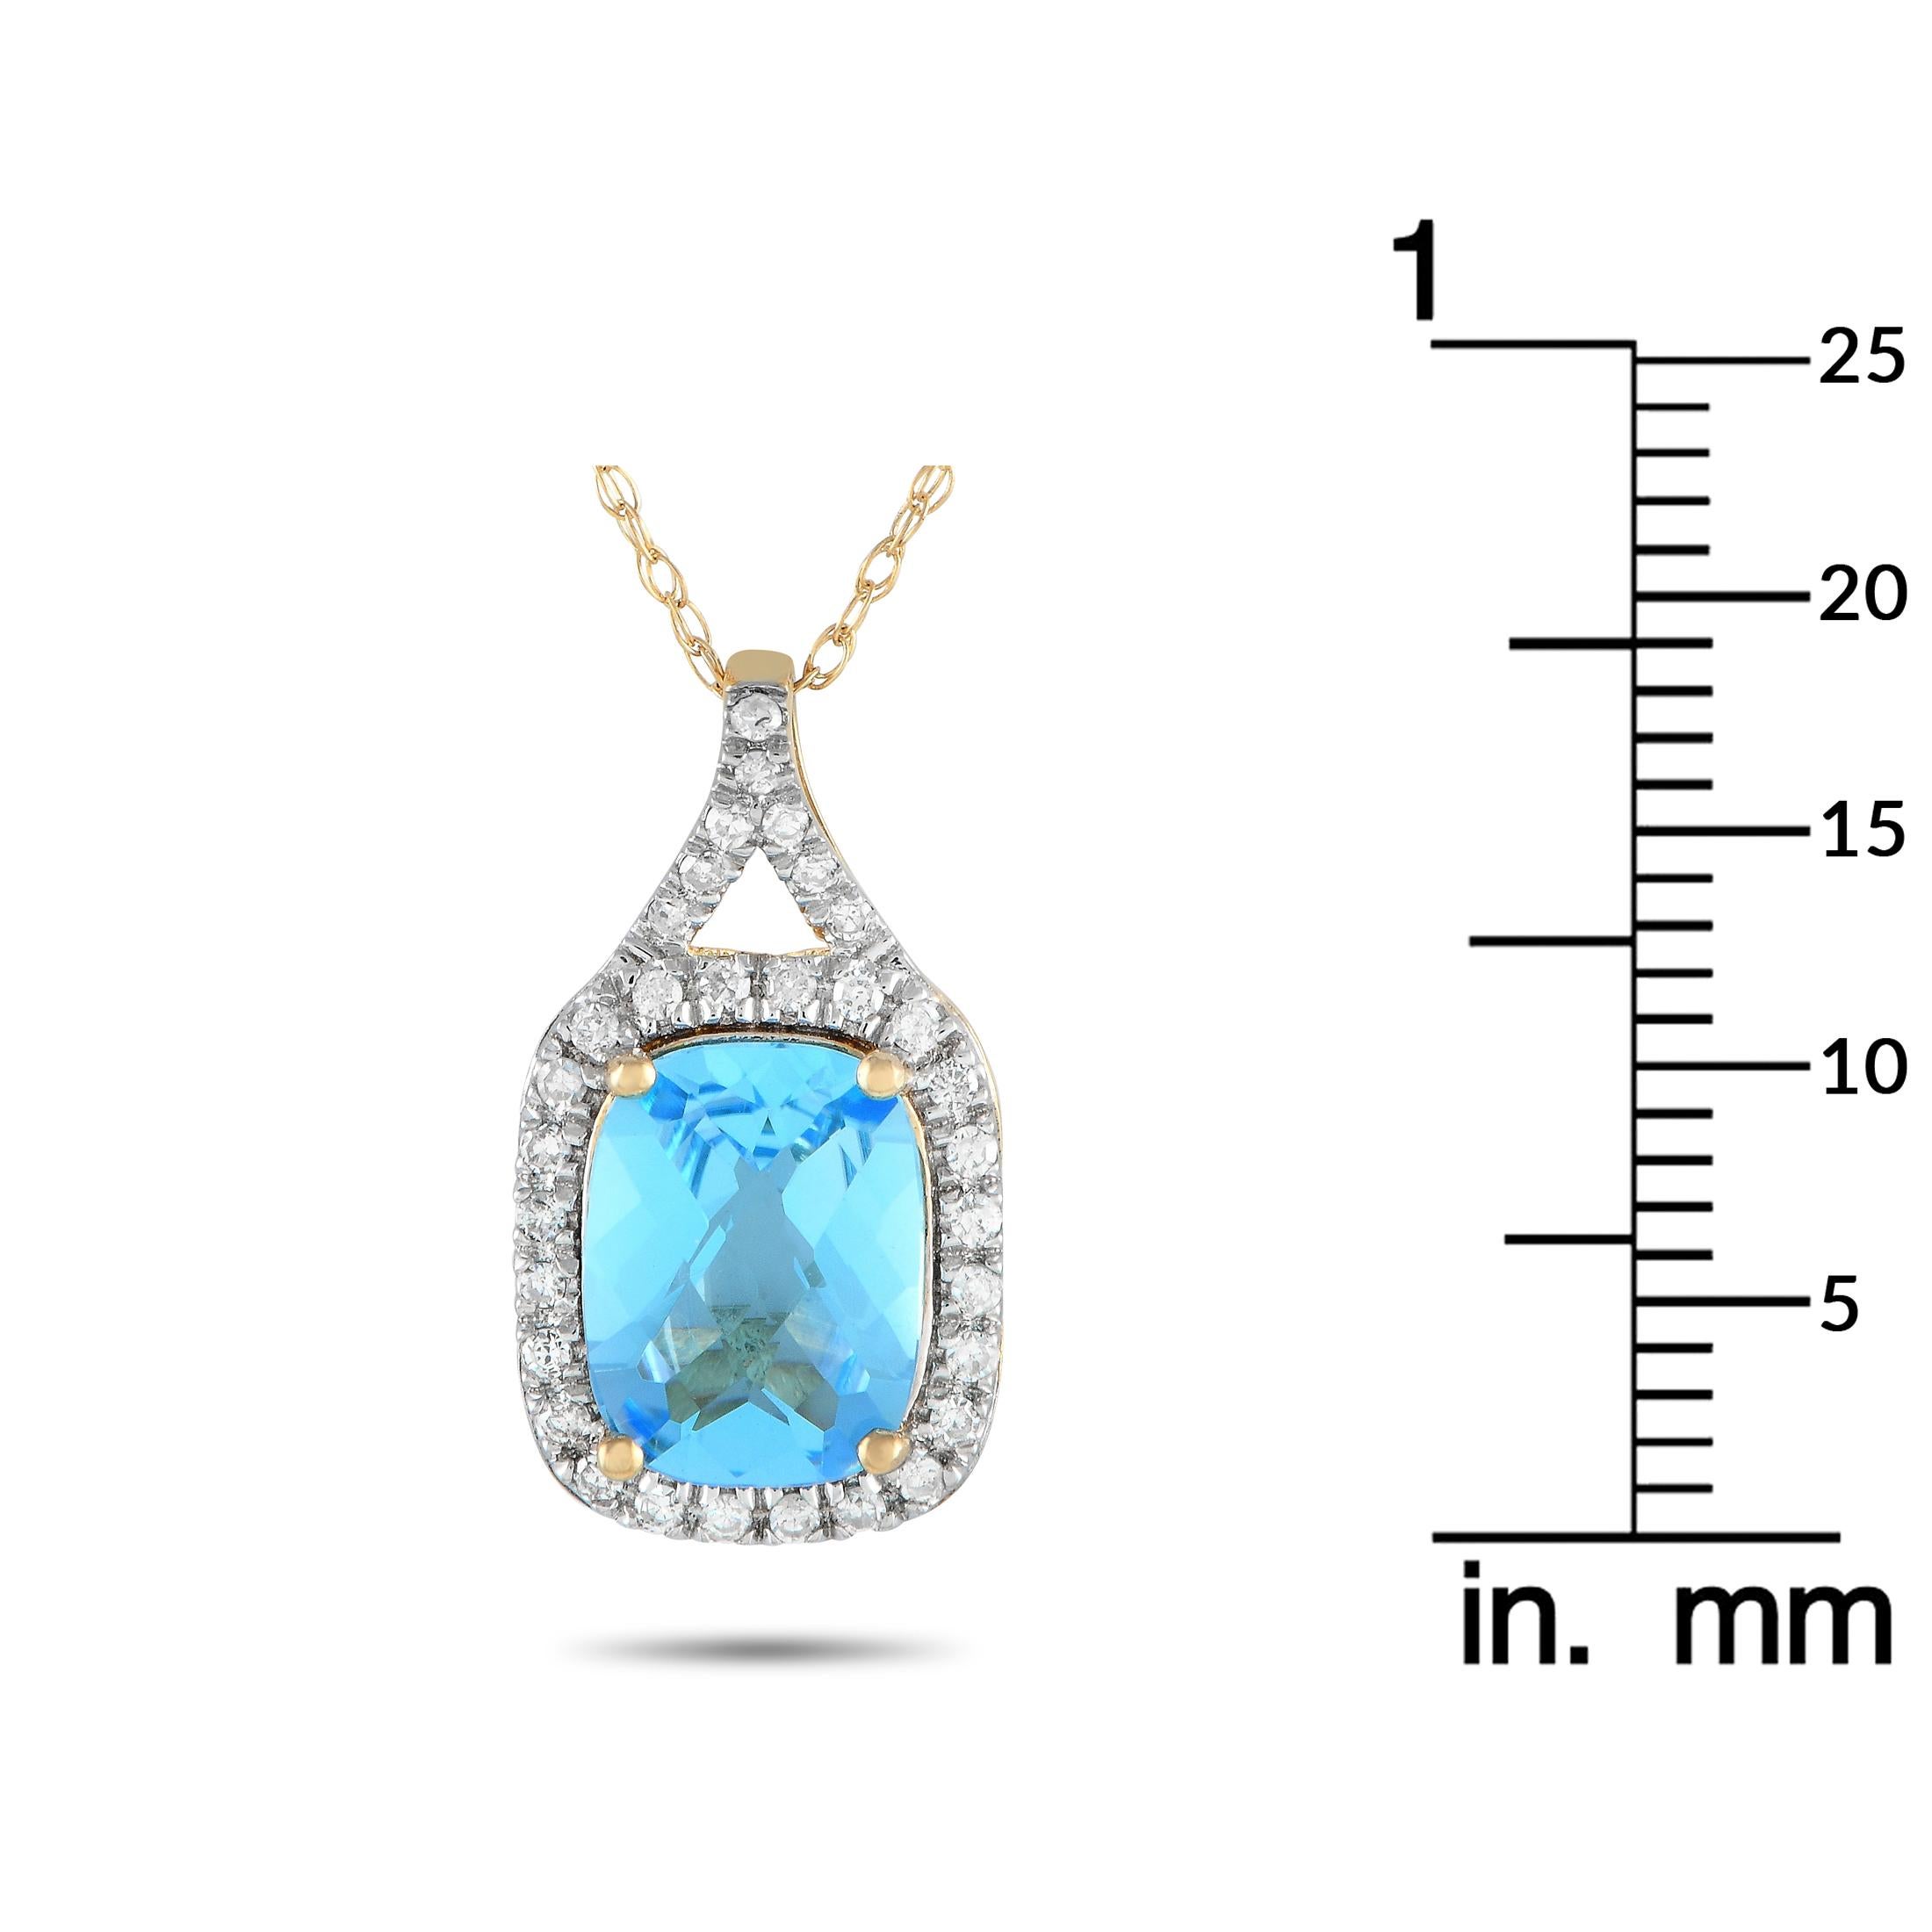 LB Exclusive 14K Yellow Gold 0.13ct Diamond and Blue Topaz Necklace PD4-15472YBT In New Condition For Sale In Southampton, PA